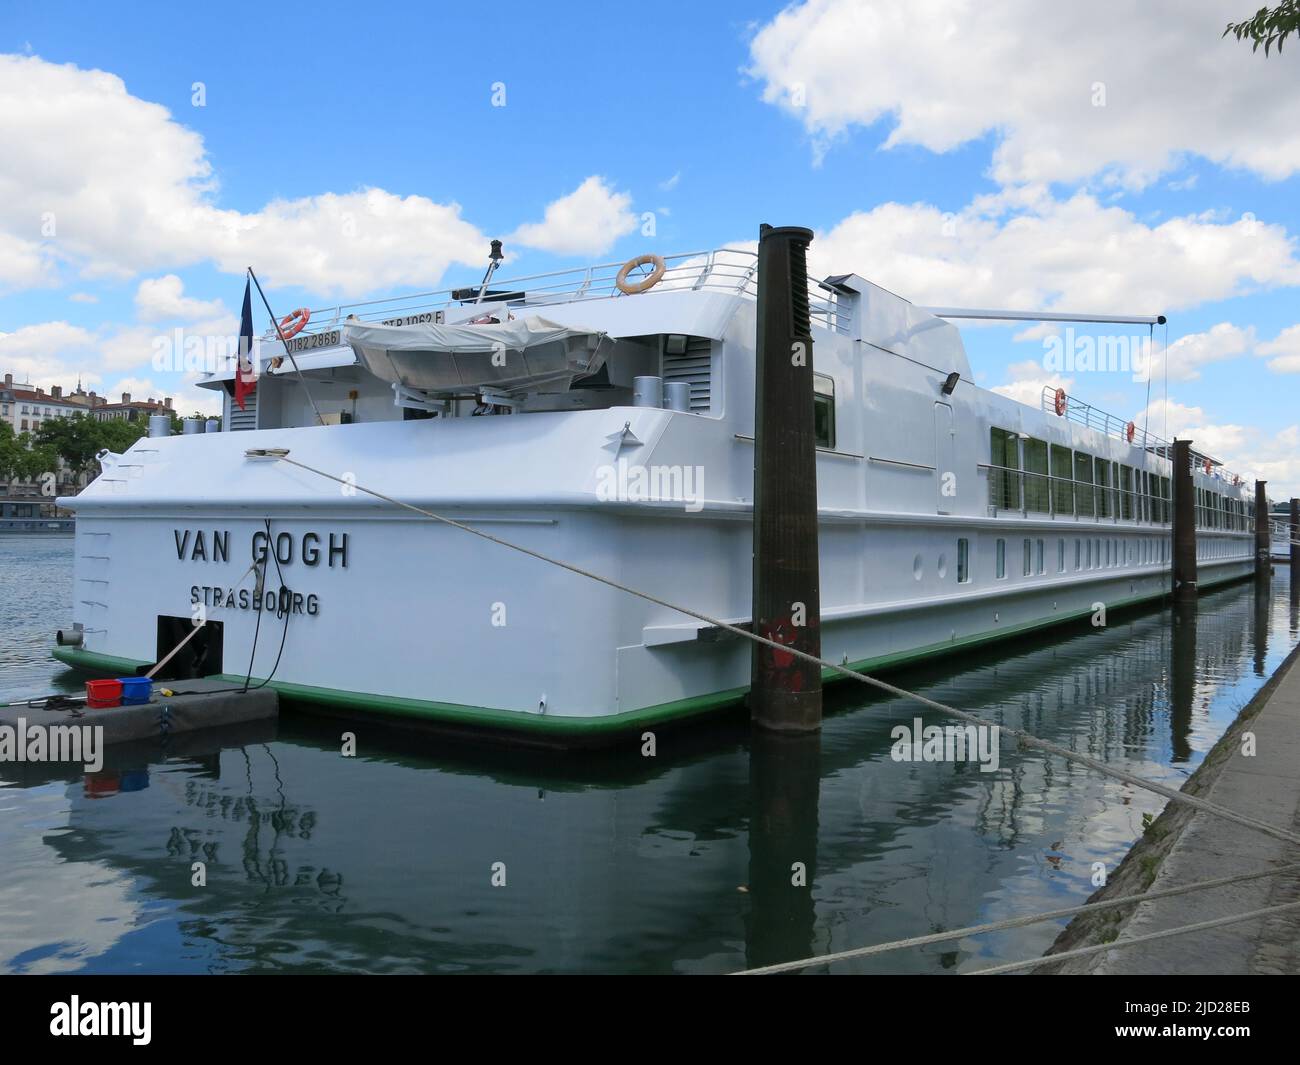 The MS Van Gogh is owned by CroisiEurope and is hired by several cruising companies to offer cruises on the River Rhone in southern France. Stock Photo